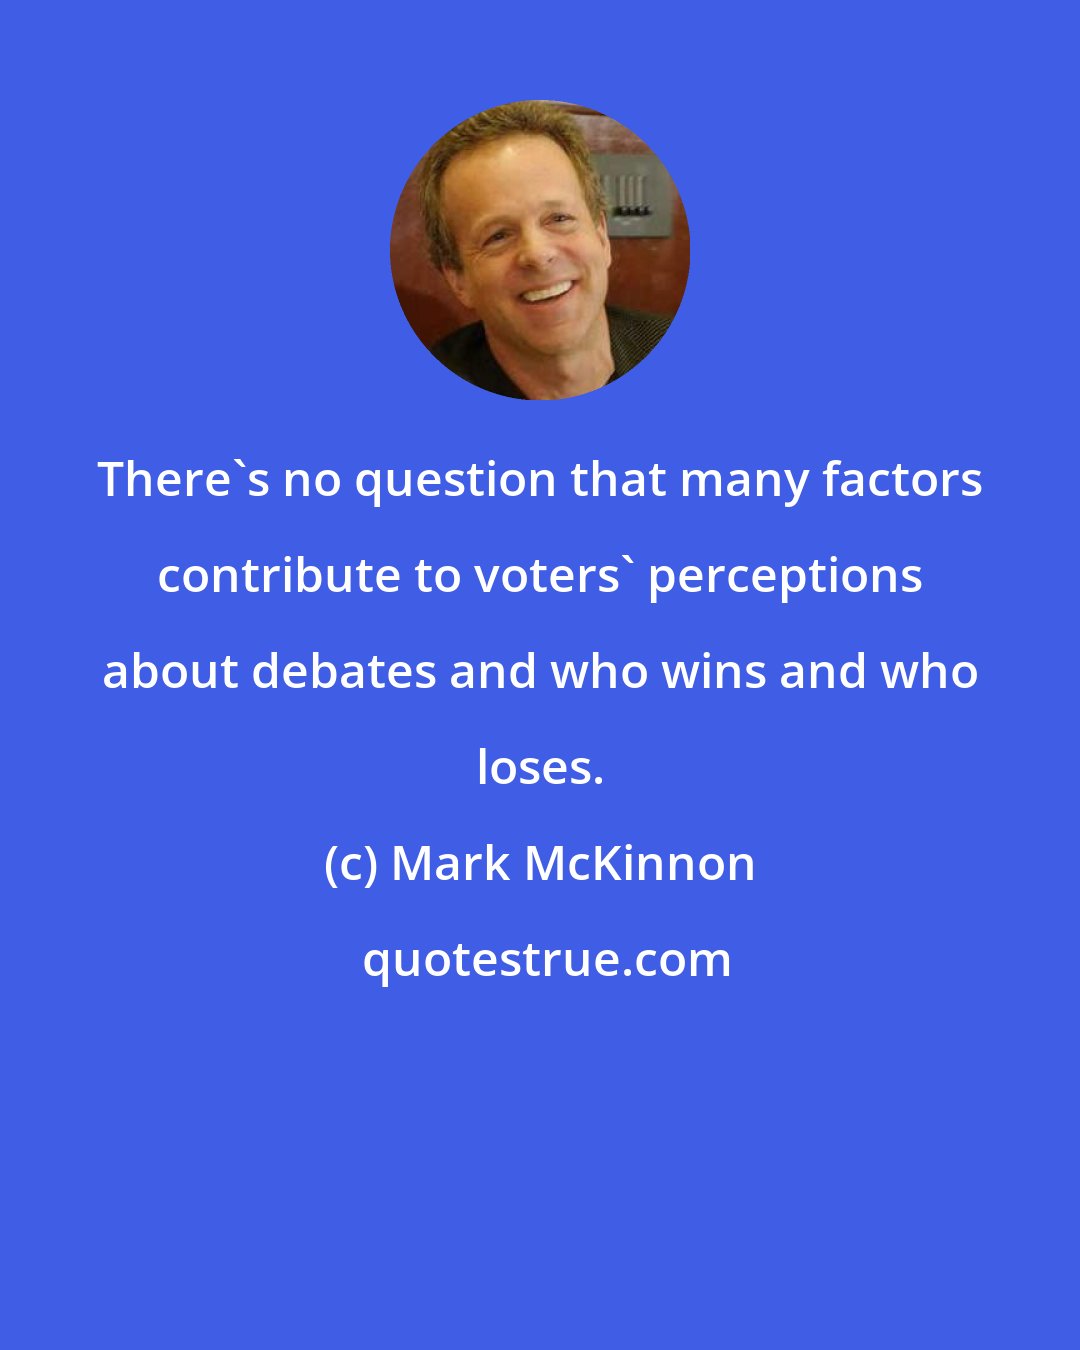 Mark McKinnon: There's no question that many factors contribute to voters' perceptions about debates and who wins and who loses.